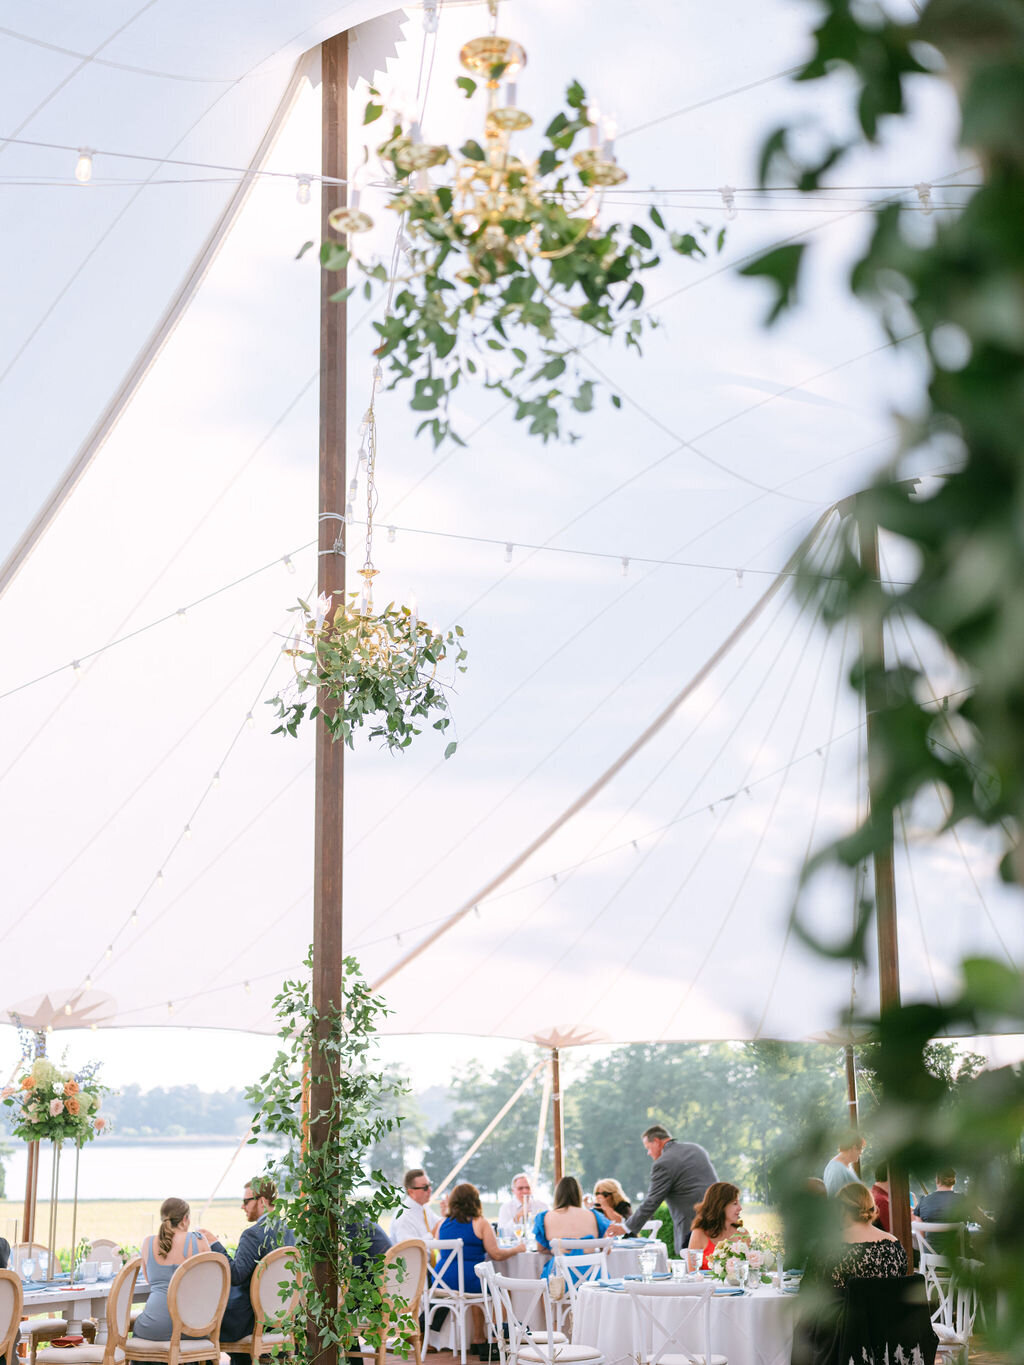 Smilax greenery hanging on gold chandeliers and up the polls of the tented reception.